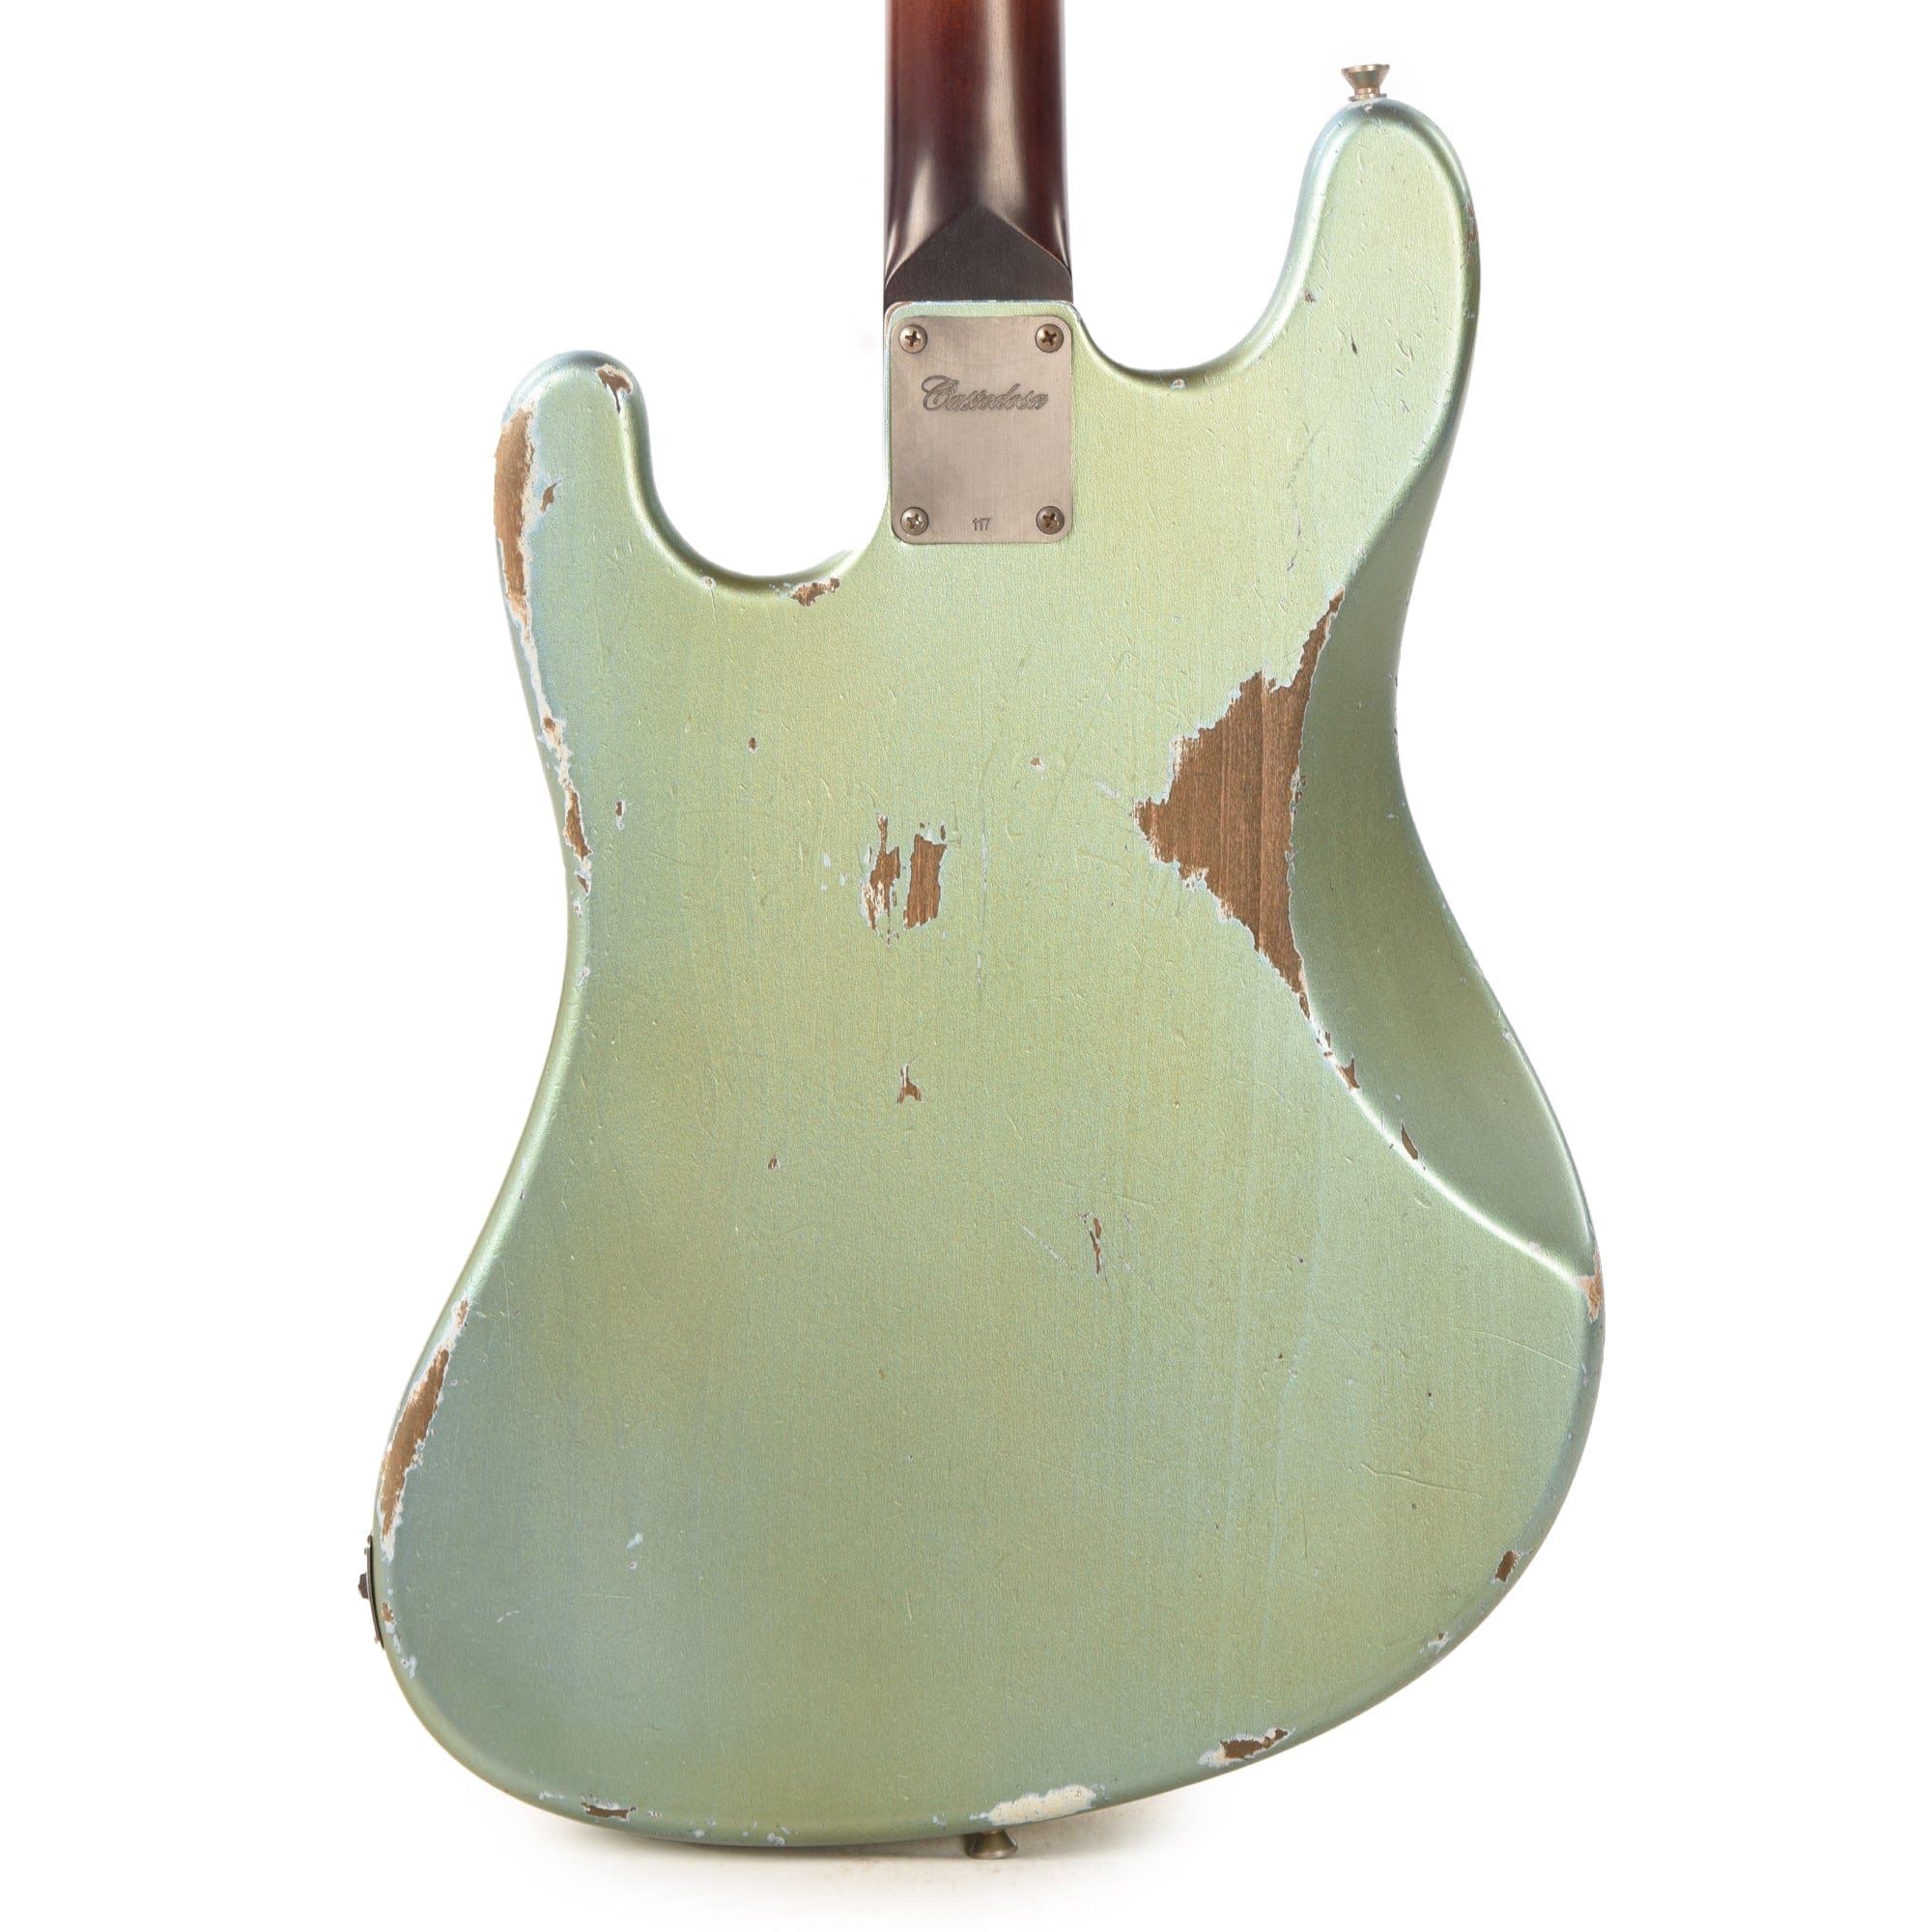 Castedosa Conchers Standard Aged Ice Blue Metallic Electric Guitars / Solid Body